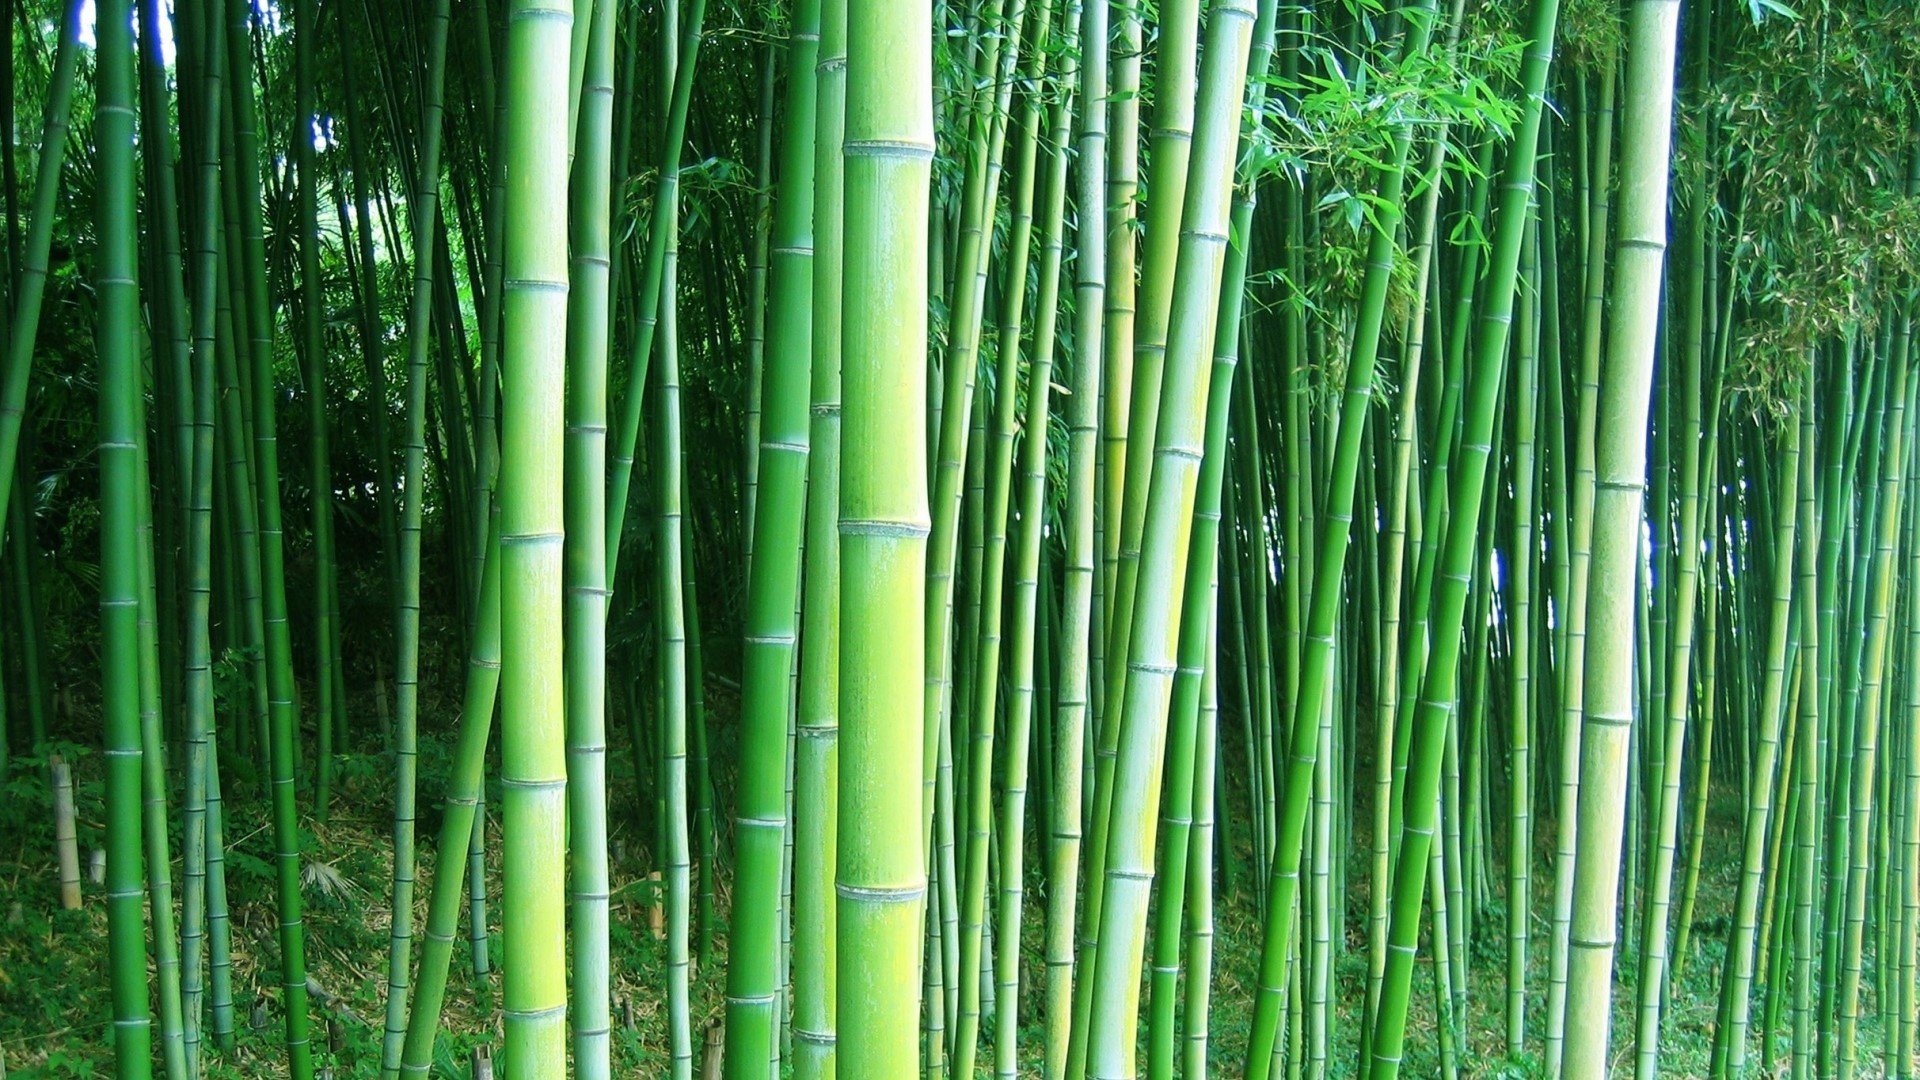 Bamboo Forest - Other & Anime Background Wallpapers on Desktop Nexus (Image  1782225)